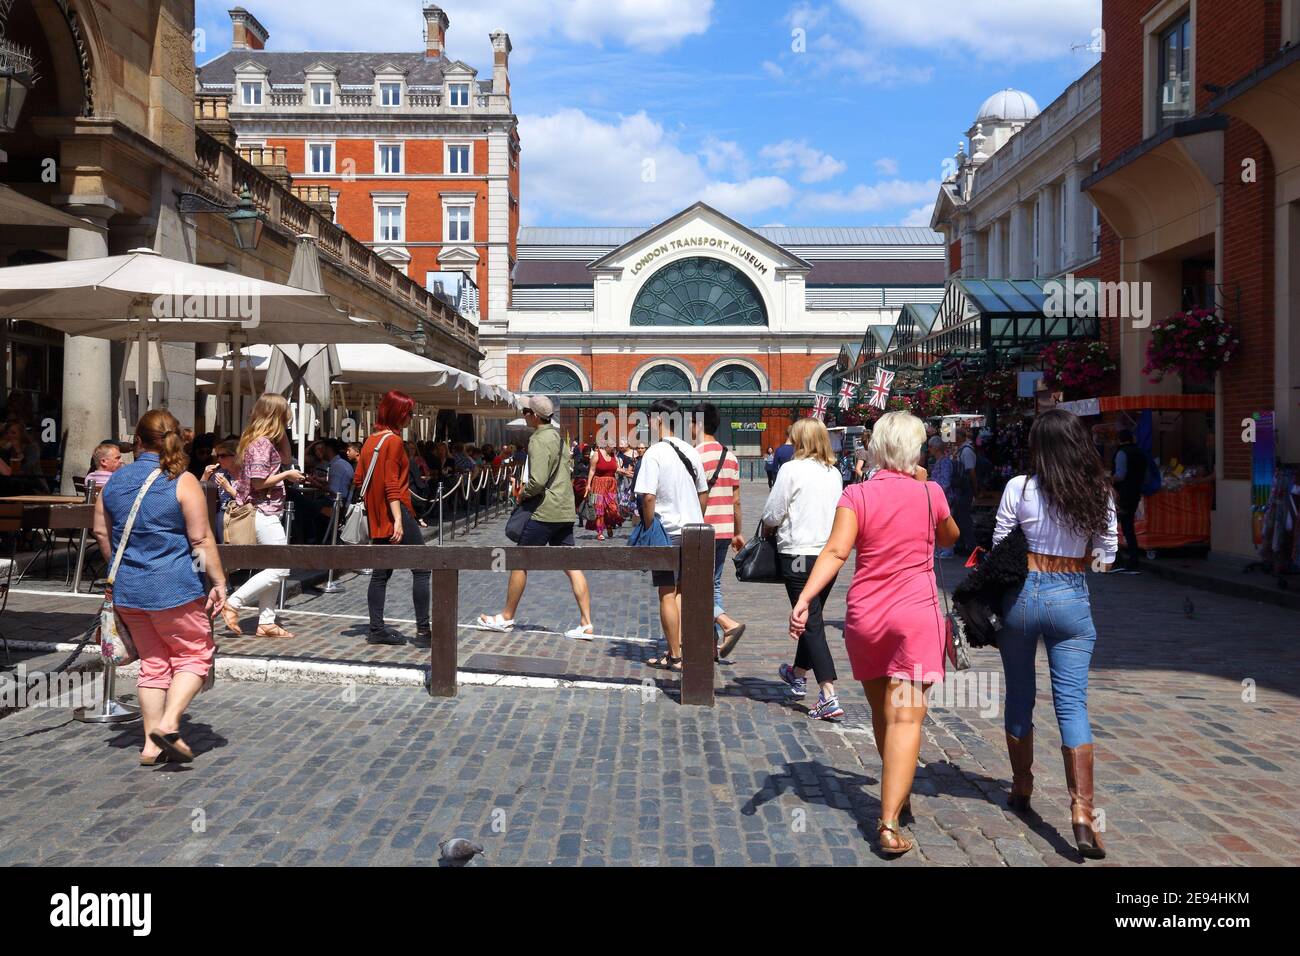 LONDON, UK - JULY 6, 2016: People visit Covent Garden in London, UK. London is the most populous city in the UK with 13 million people living in its m Stock Photo